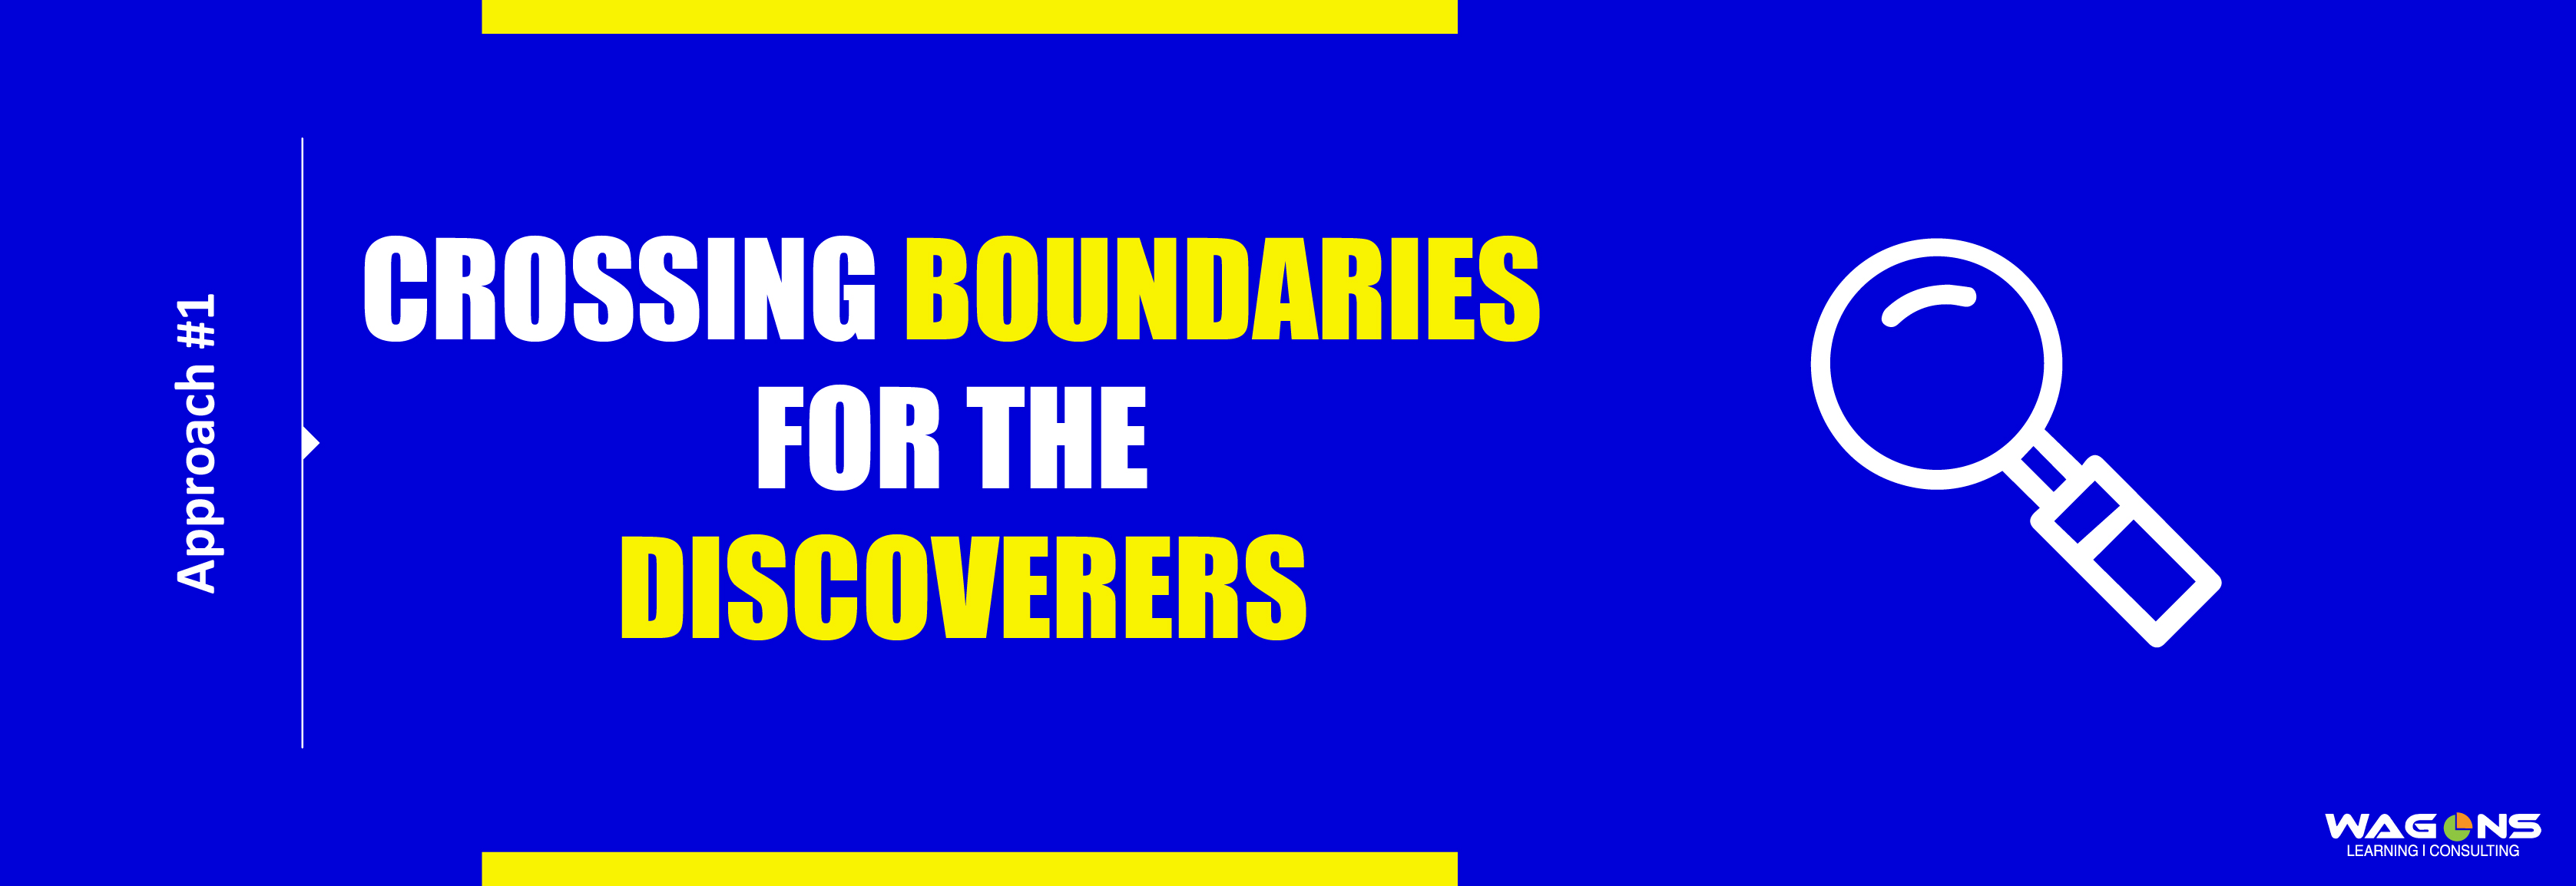 crossing boundaries for the discoverers